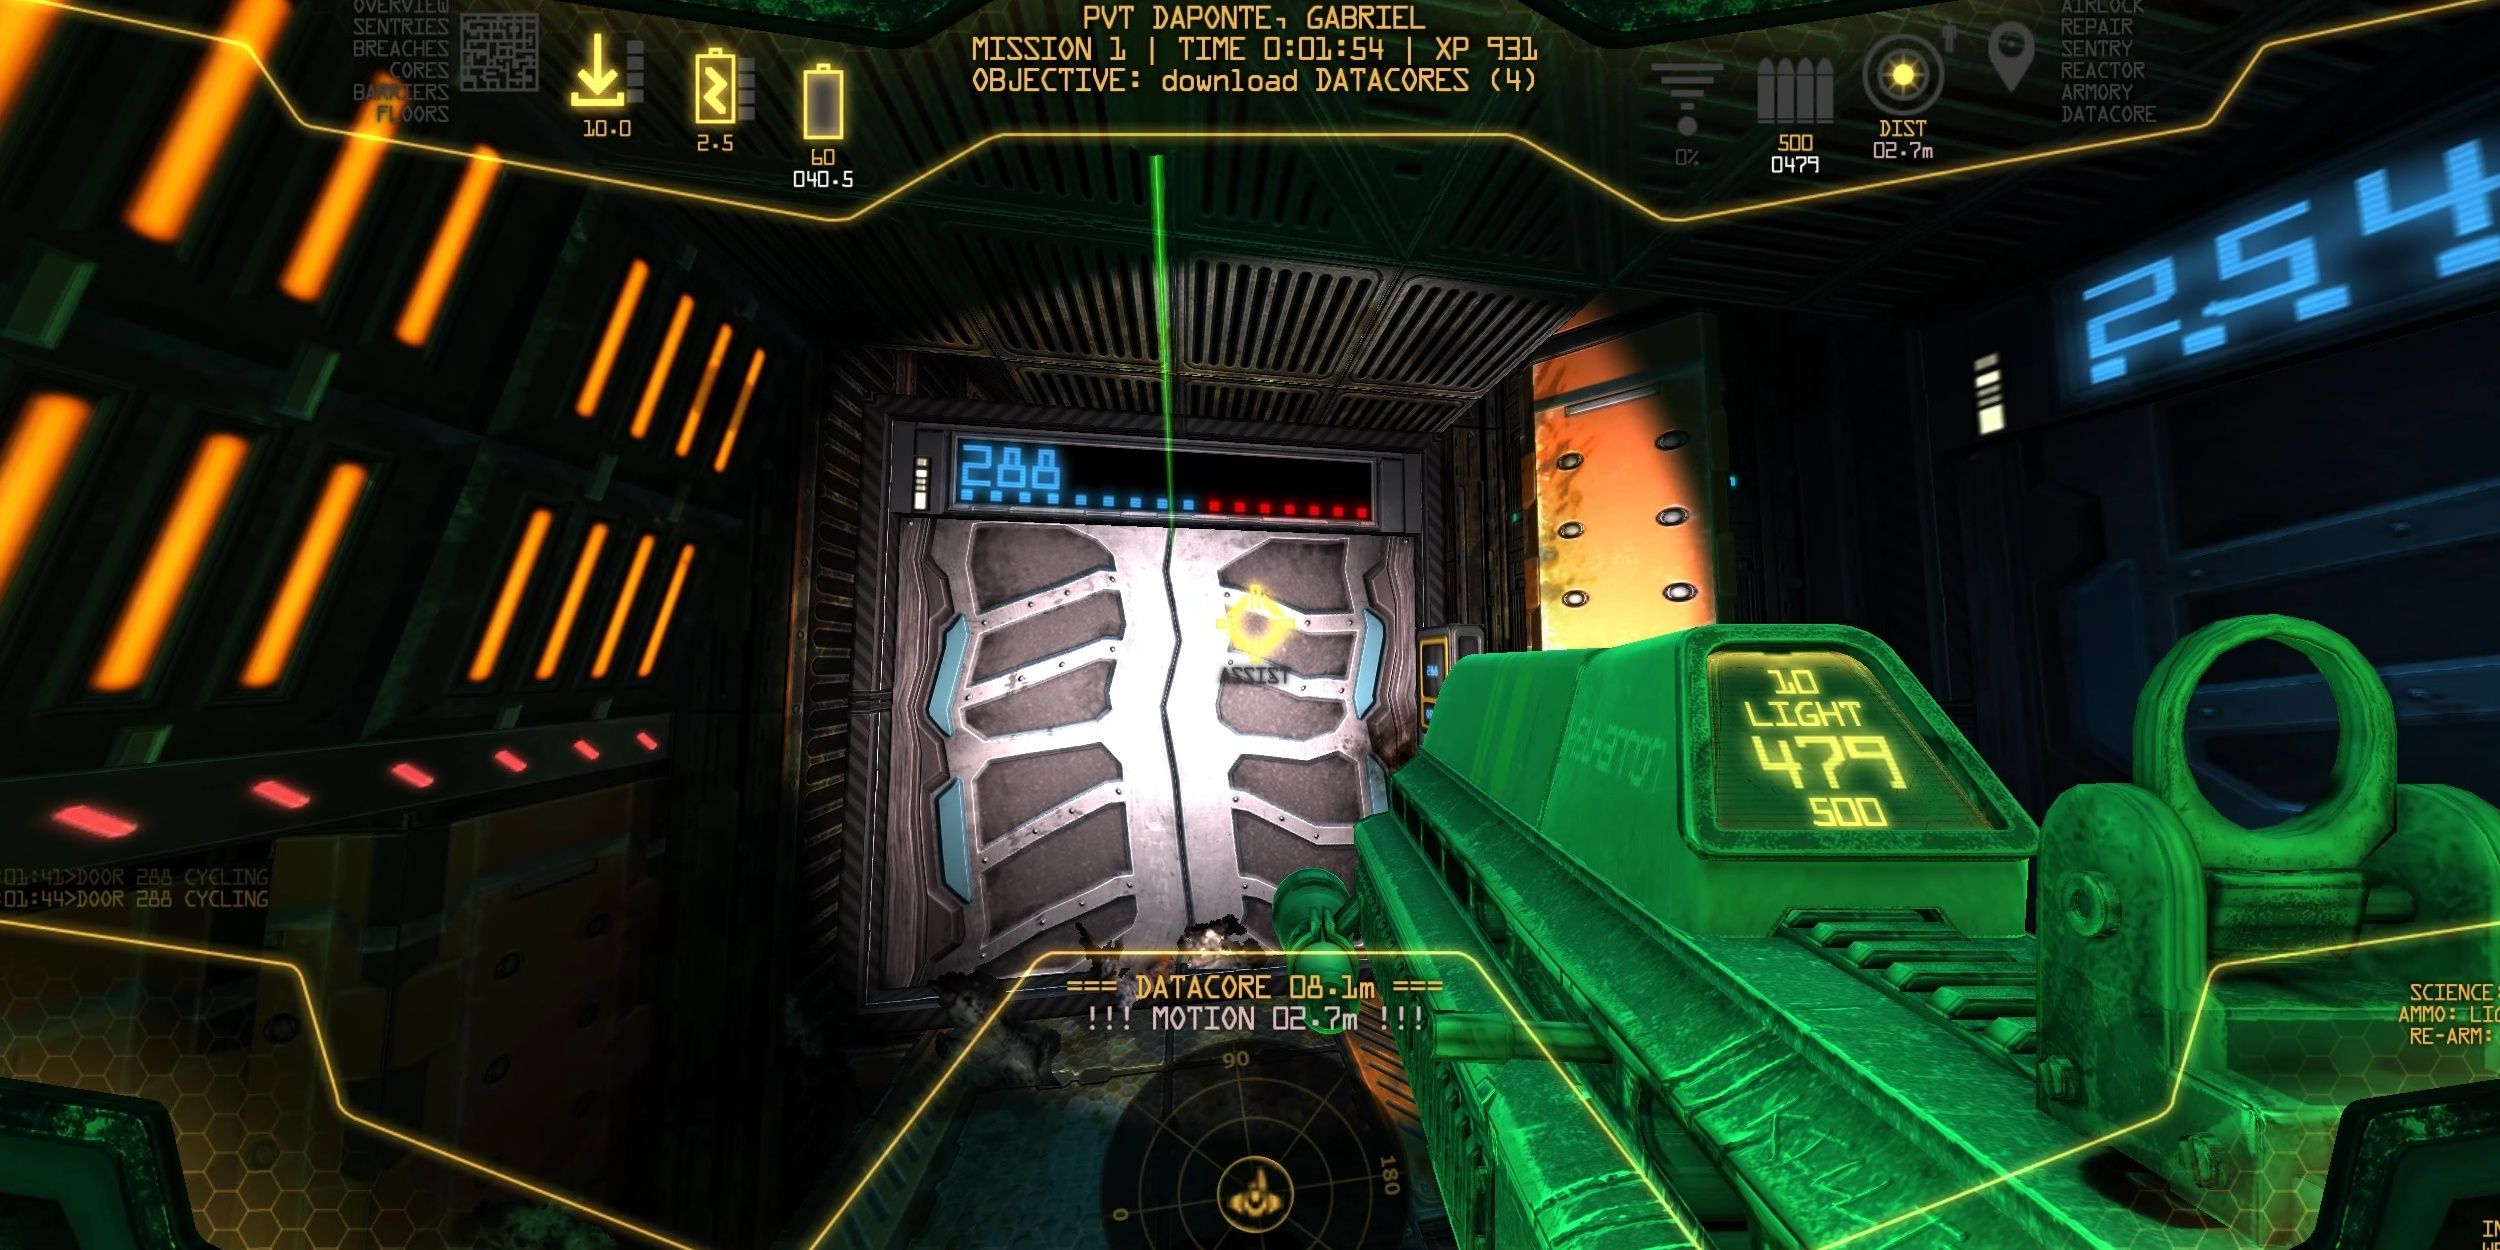 A door crumpling under the attack of Space Beasts. The blue dots above the door indicate how many more hits it can take before breaking completely.